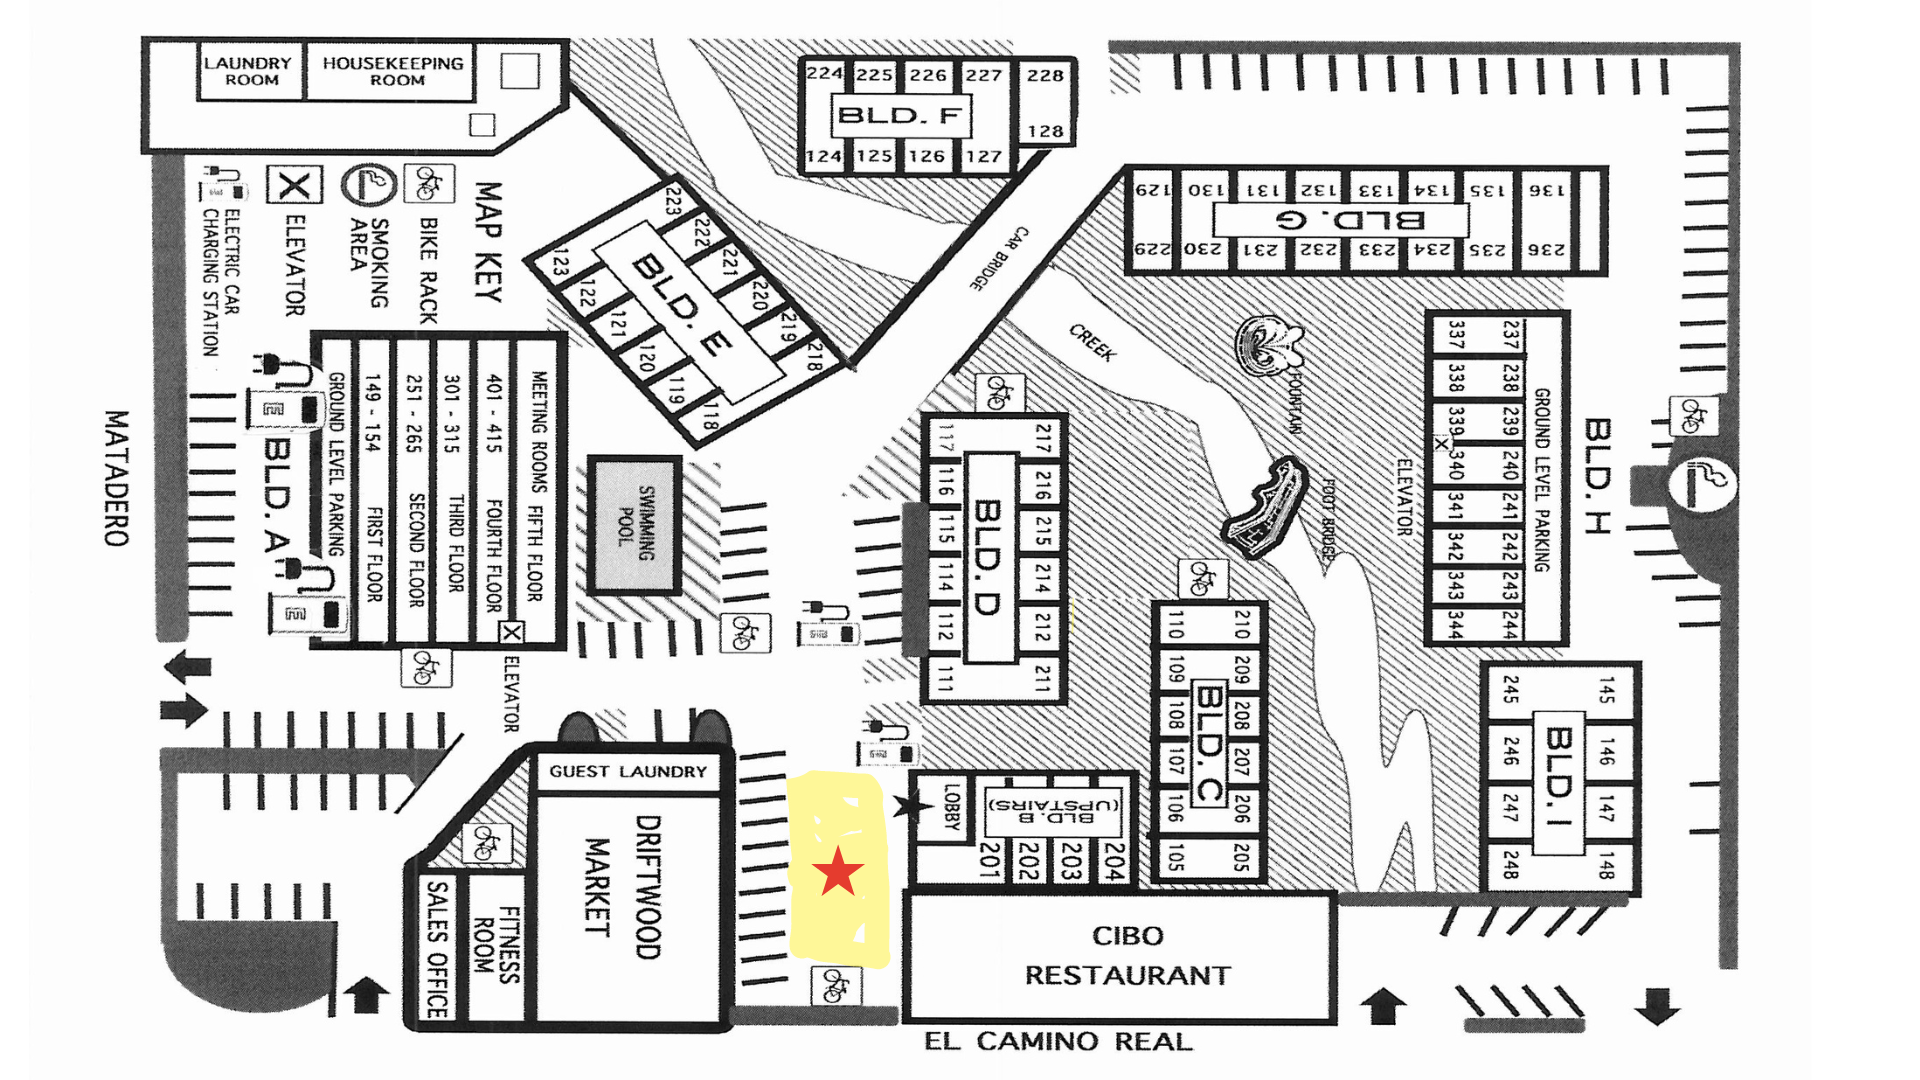 Hotel map with meeting area highlighted.